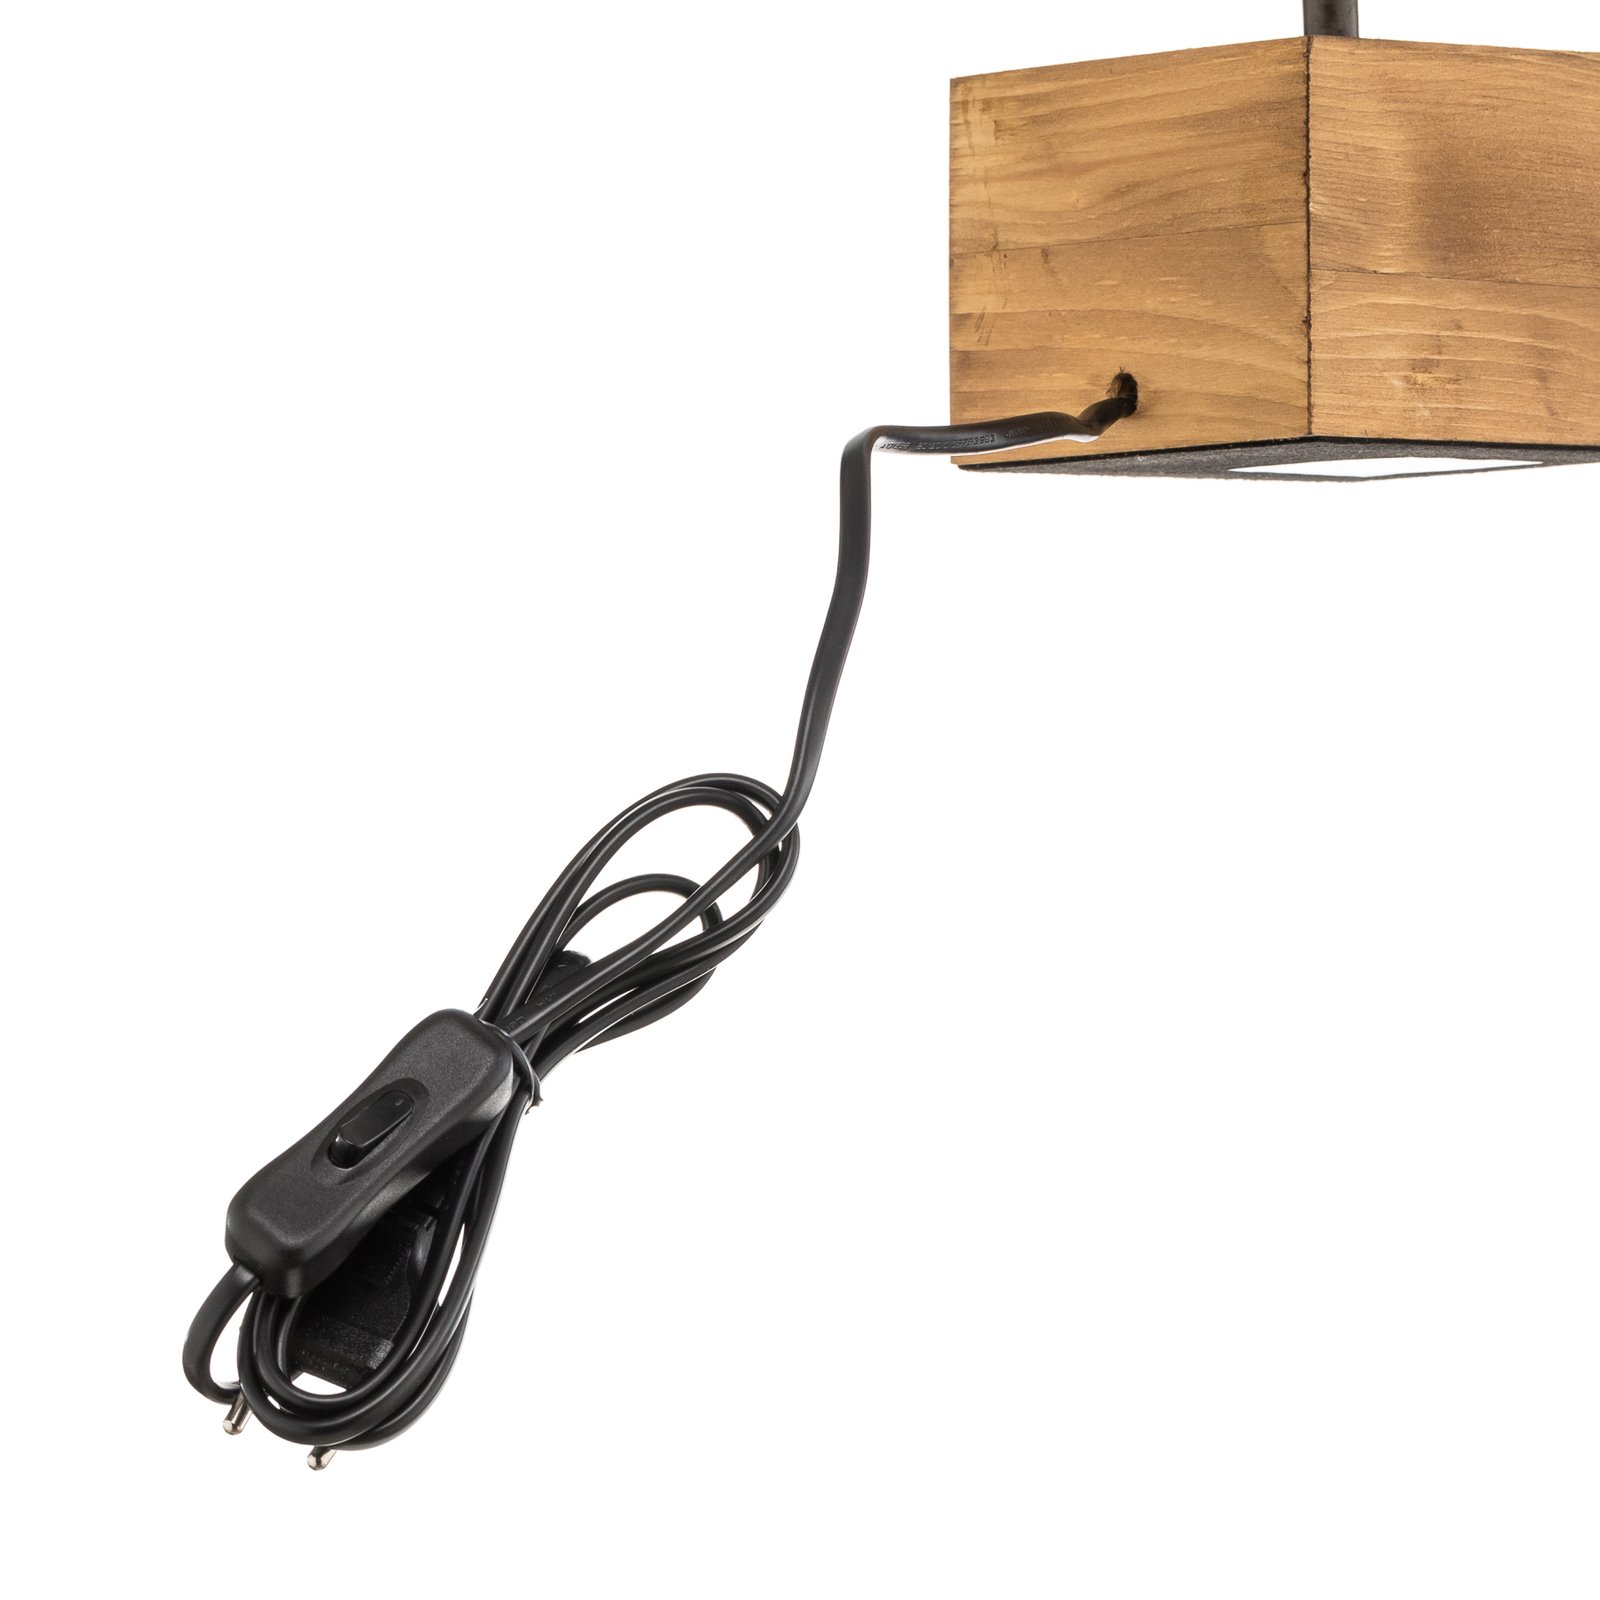 Woody table lamp with wooden base, 12 cm x 12 cm